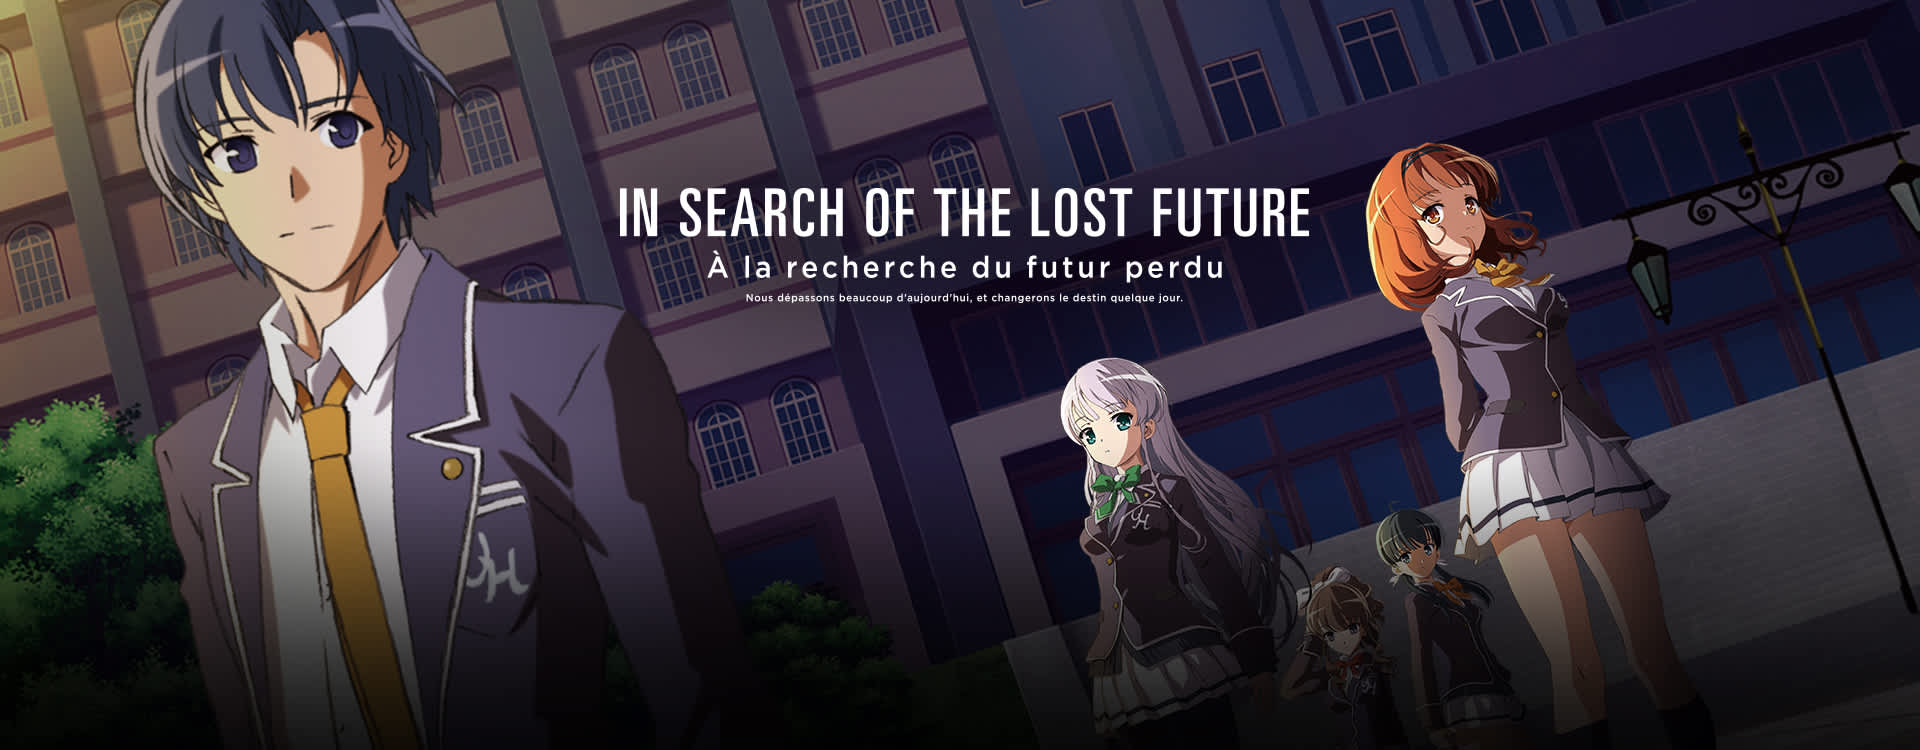 download in search of the lost future